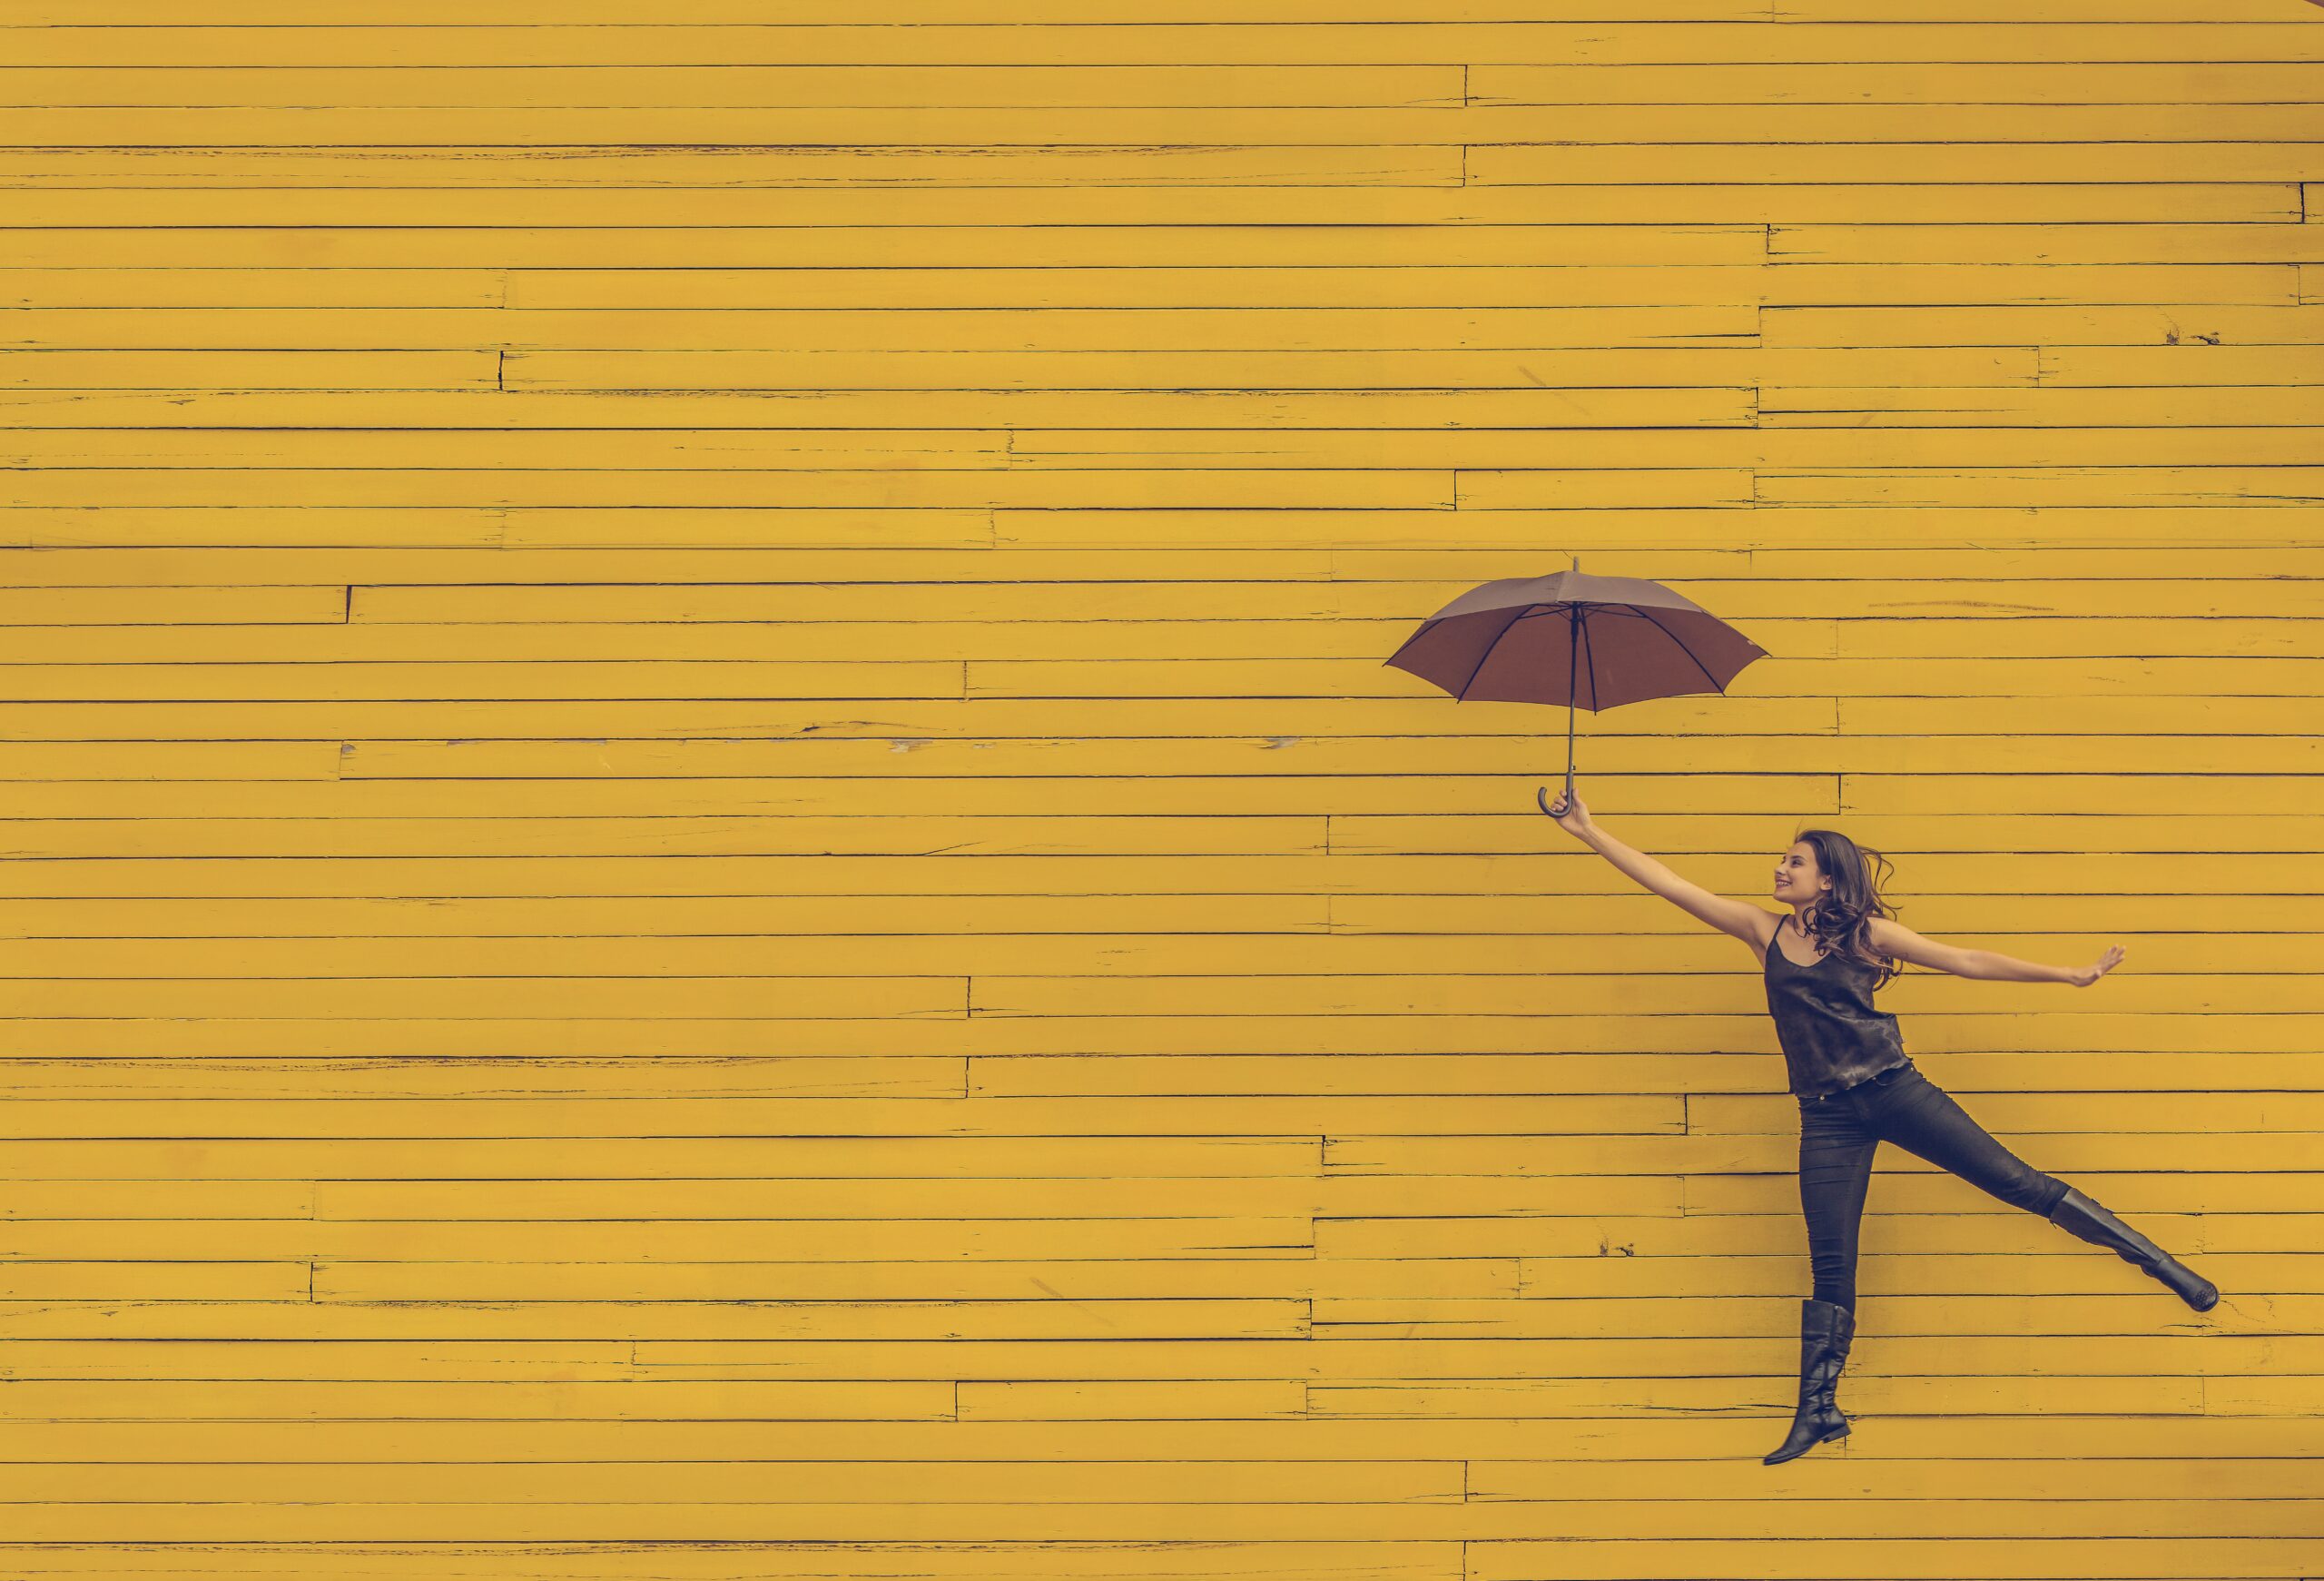 A woman is floating in the air, holding a full umbrella up like Mary Poppins, pictured against a yellow brick wall, grinning and surreal. Represents an employee engagement strategy that boosts morale. Image by Edu Lauton via Unsplash.